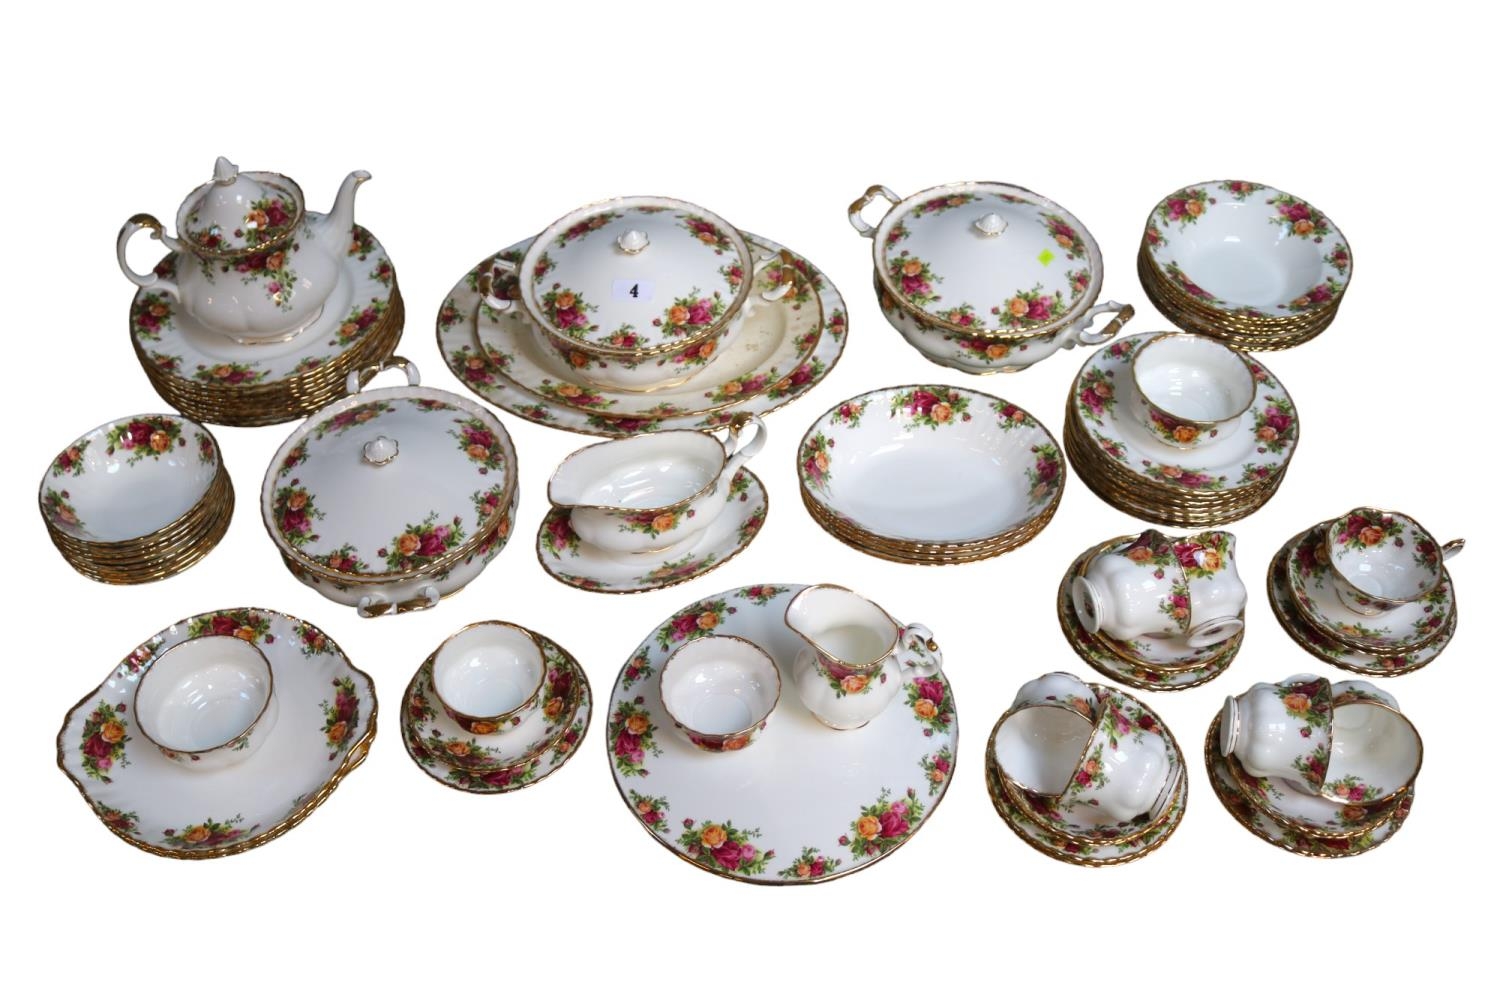 Royal Albert Old Country Roses extensive dinner service comprising of Tureens, Meat Plates, Soup